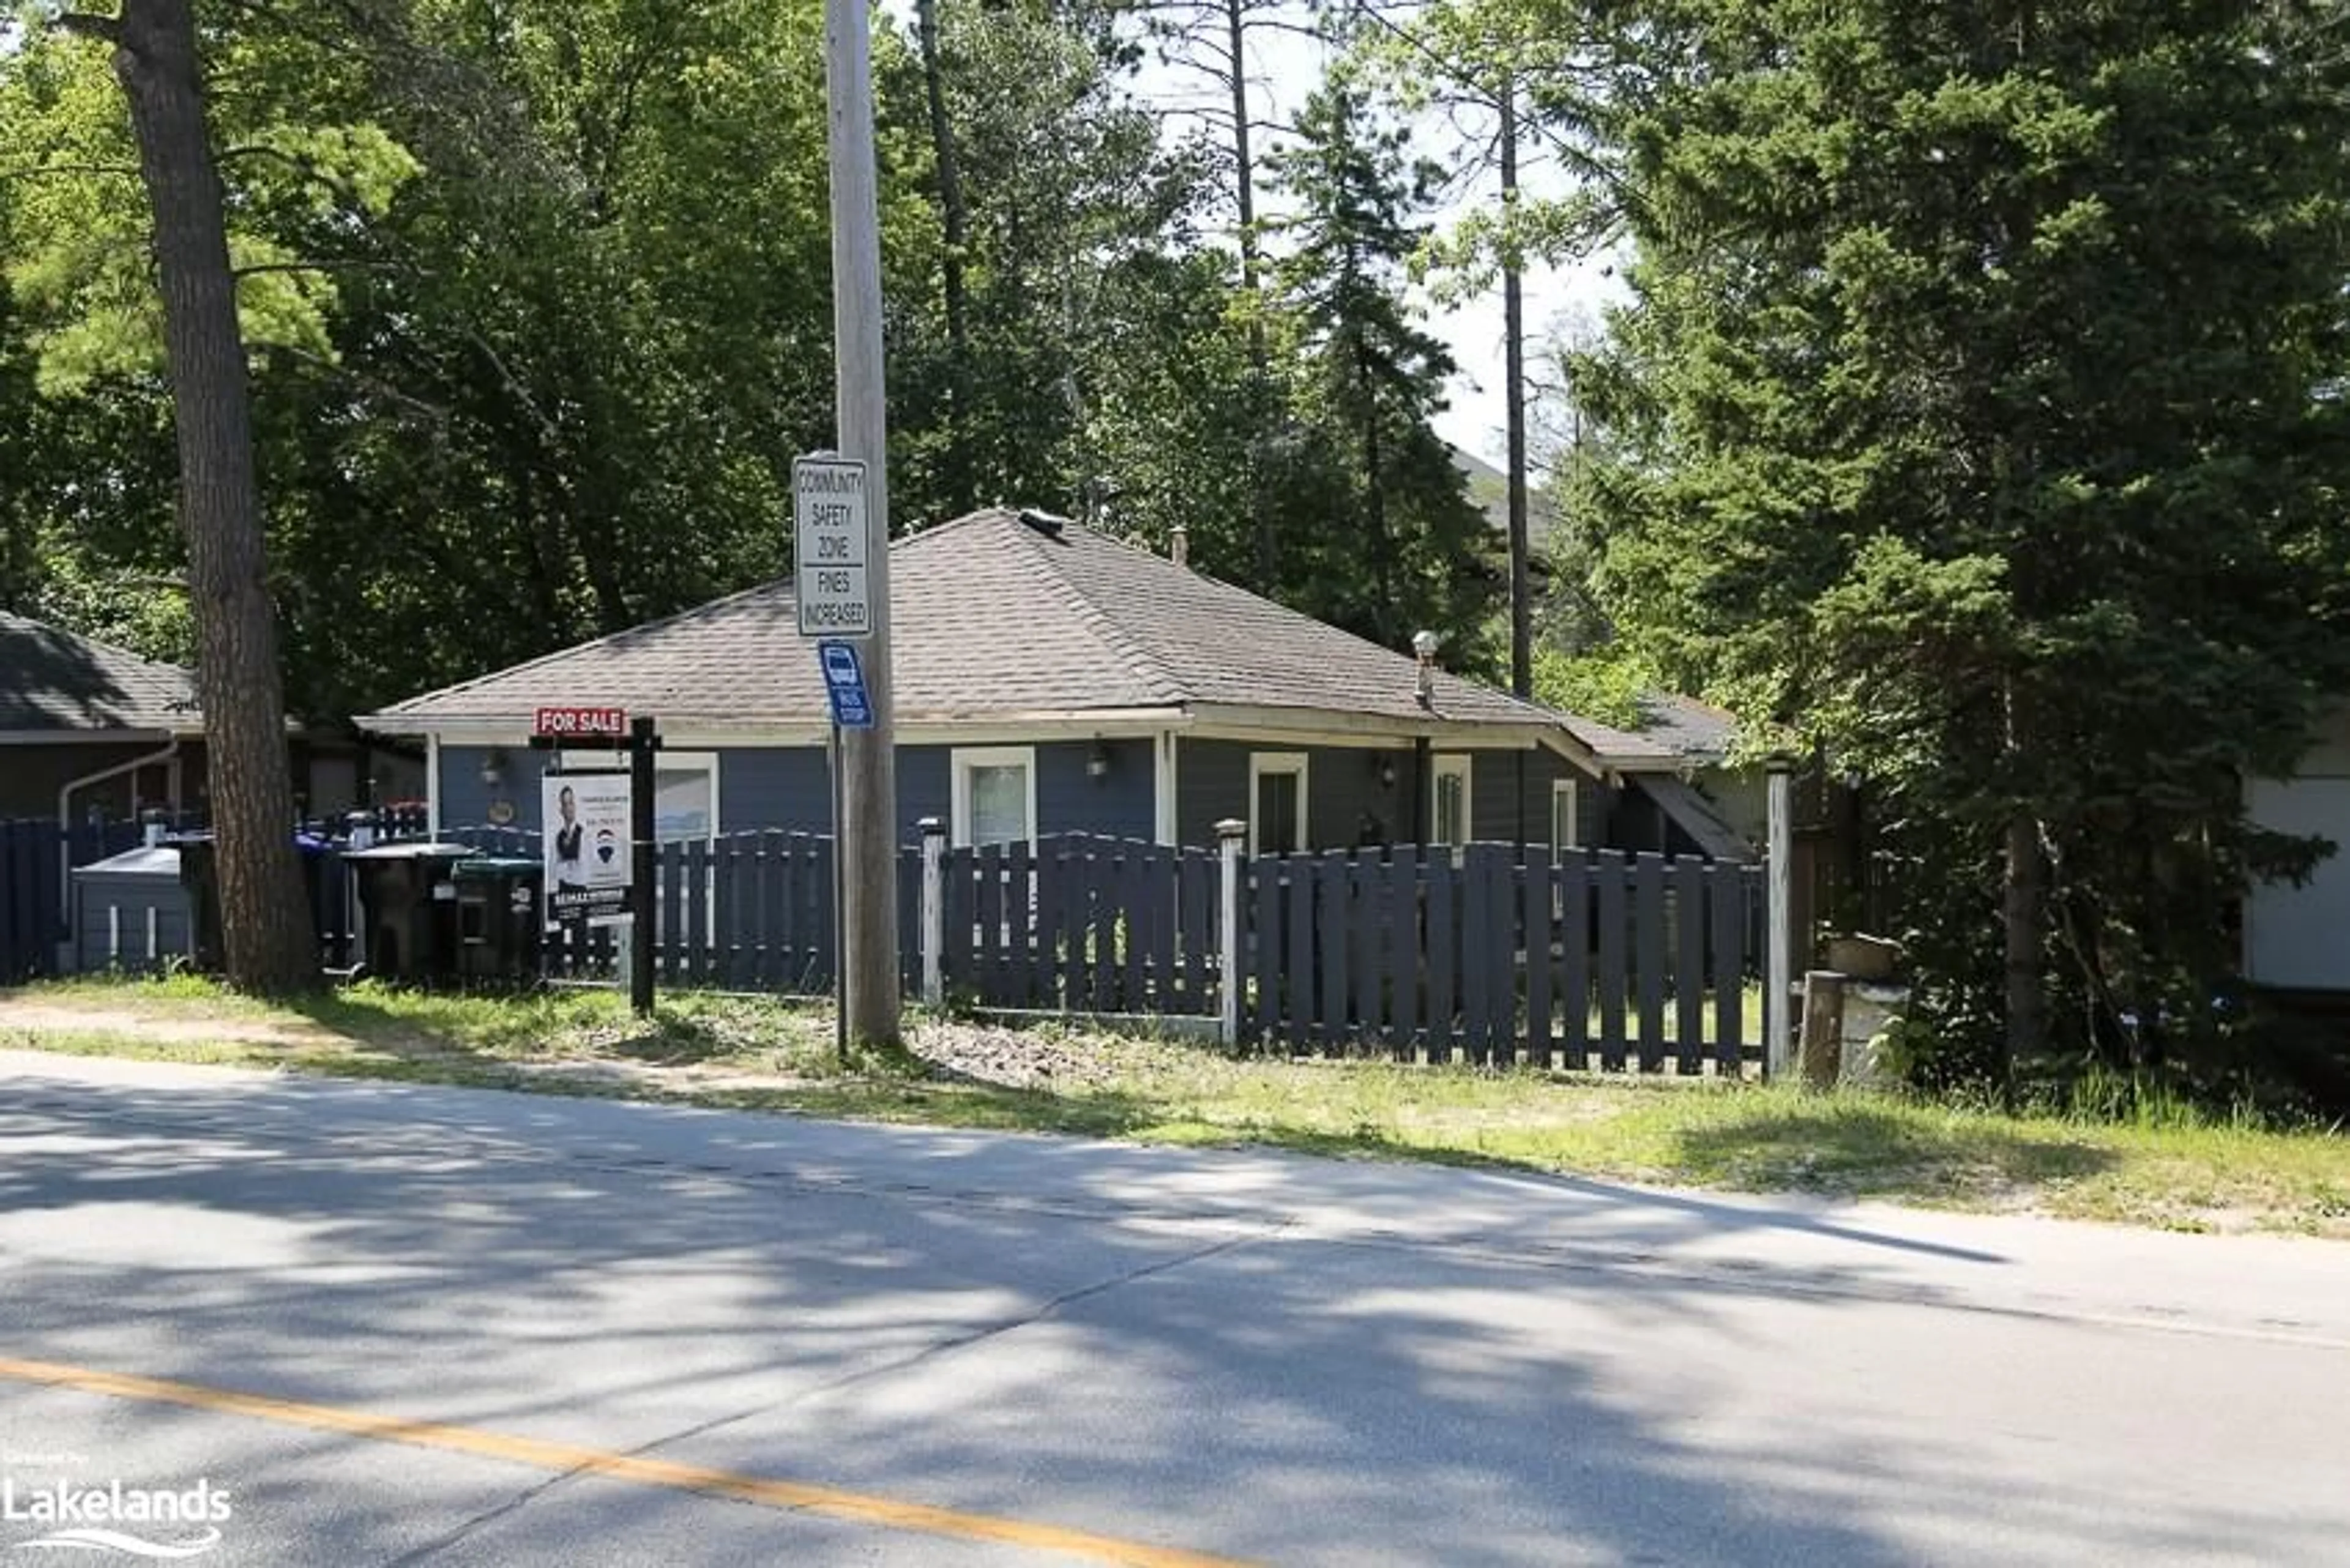 Cottage for 500 Mosley St, Wasaga Beach Ontario L9Z 2J4